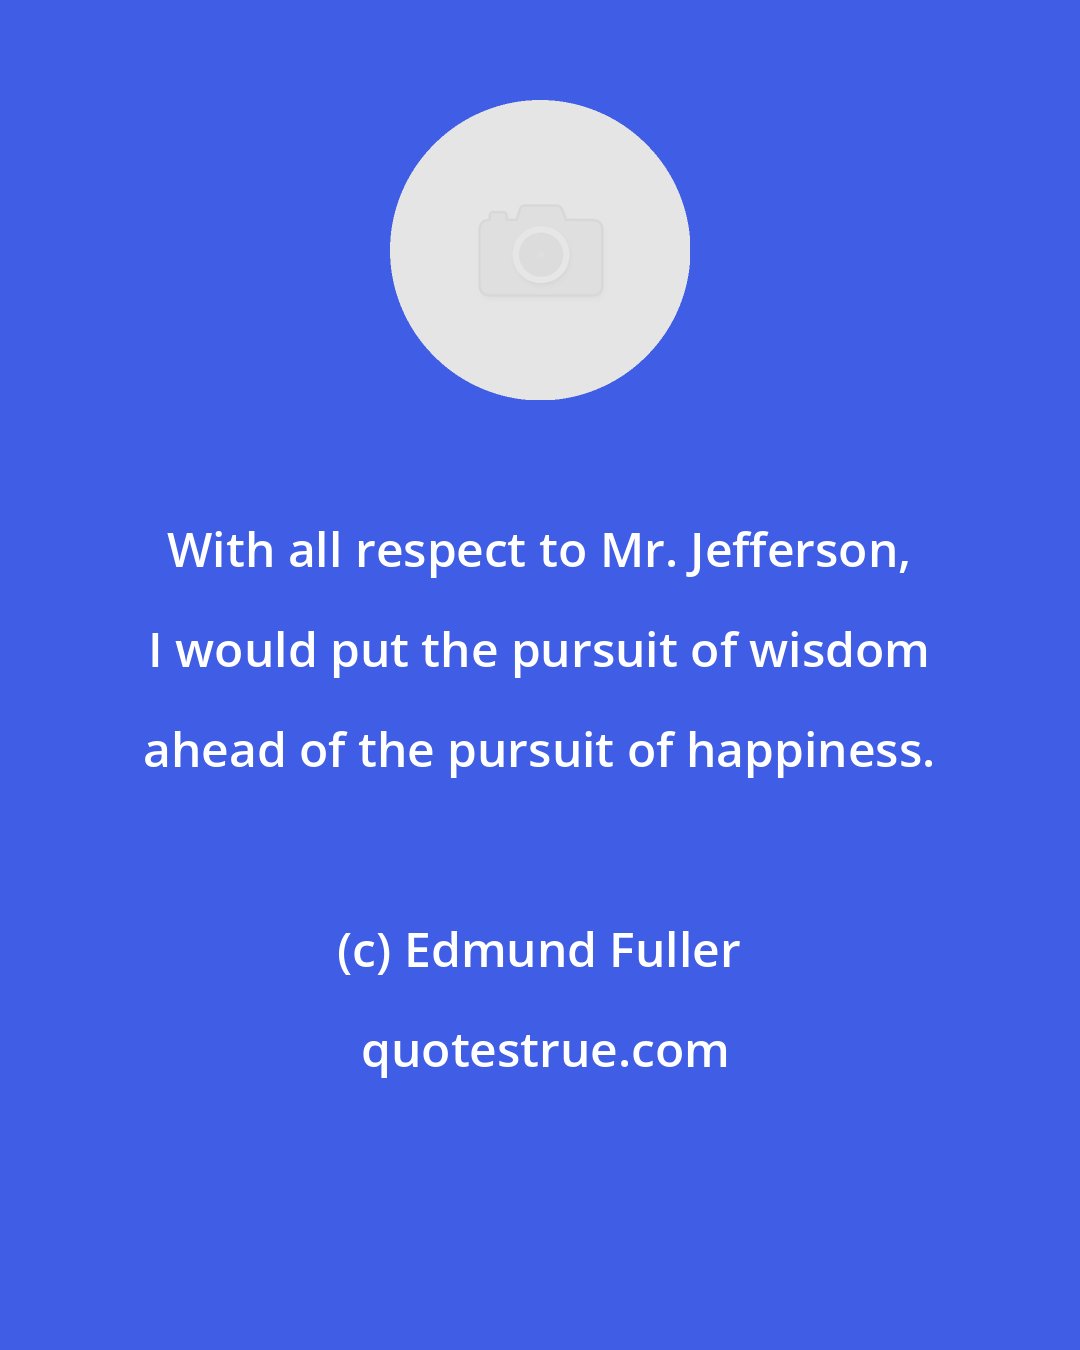 Edmund Fuller: With all respect to Mr. Jefferson, I would put the pursuit of wisdom ahead of the pursuit of happiness.